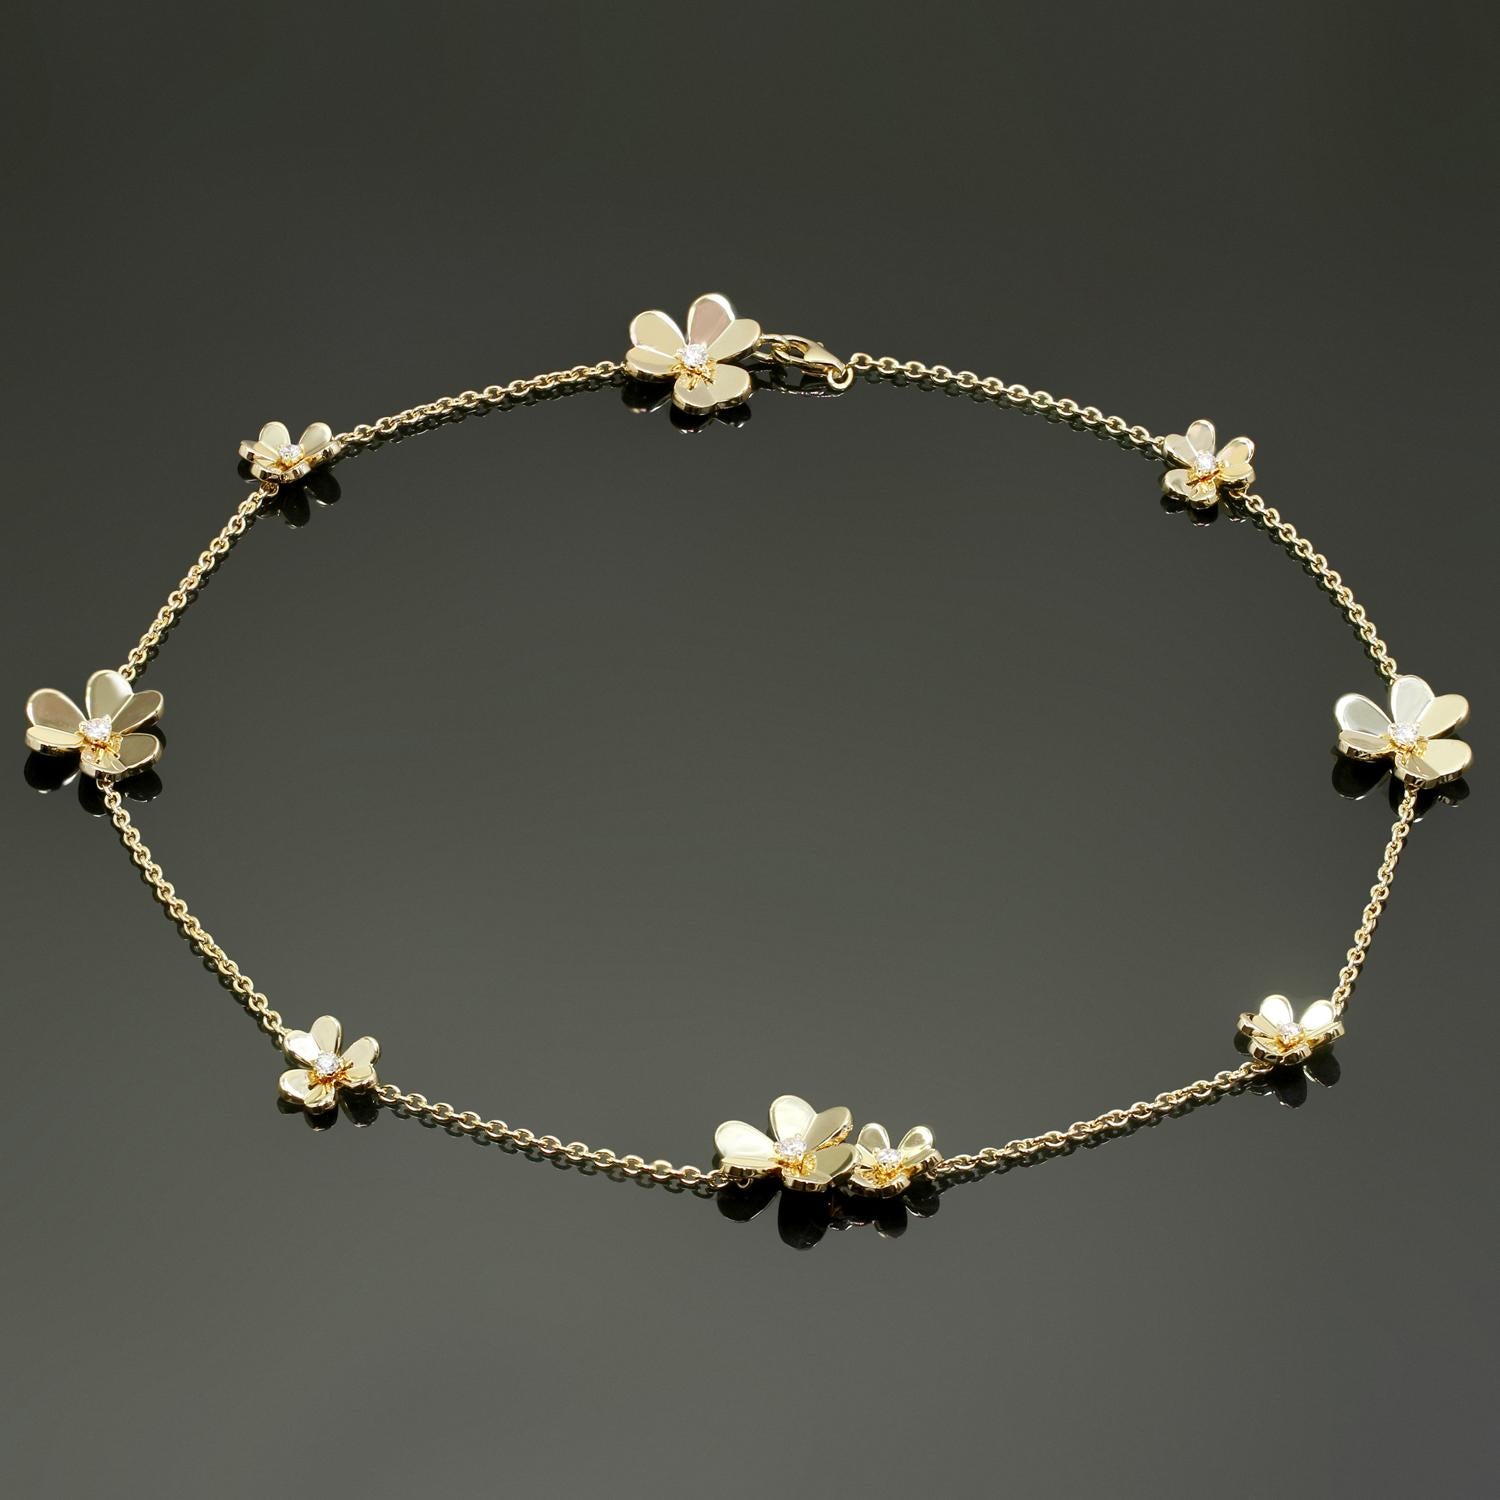 This exquisite Van Cleef & Arpels necklace from the elegant Frivole collection features 9 flowers crafted in 18k yellow gold and prong-set with 9 round brilliant-cut D-E-F color IF-VVS clarity diamonds weighing an estimated 0.61 carats. Made in